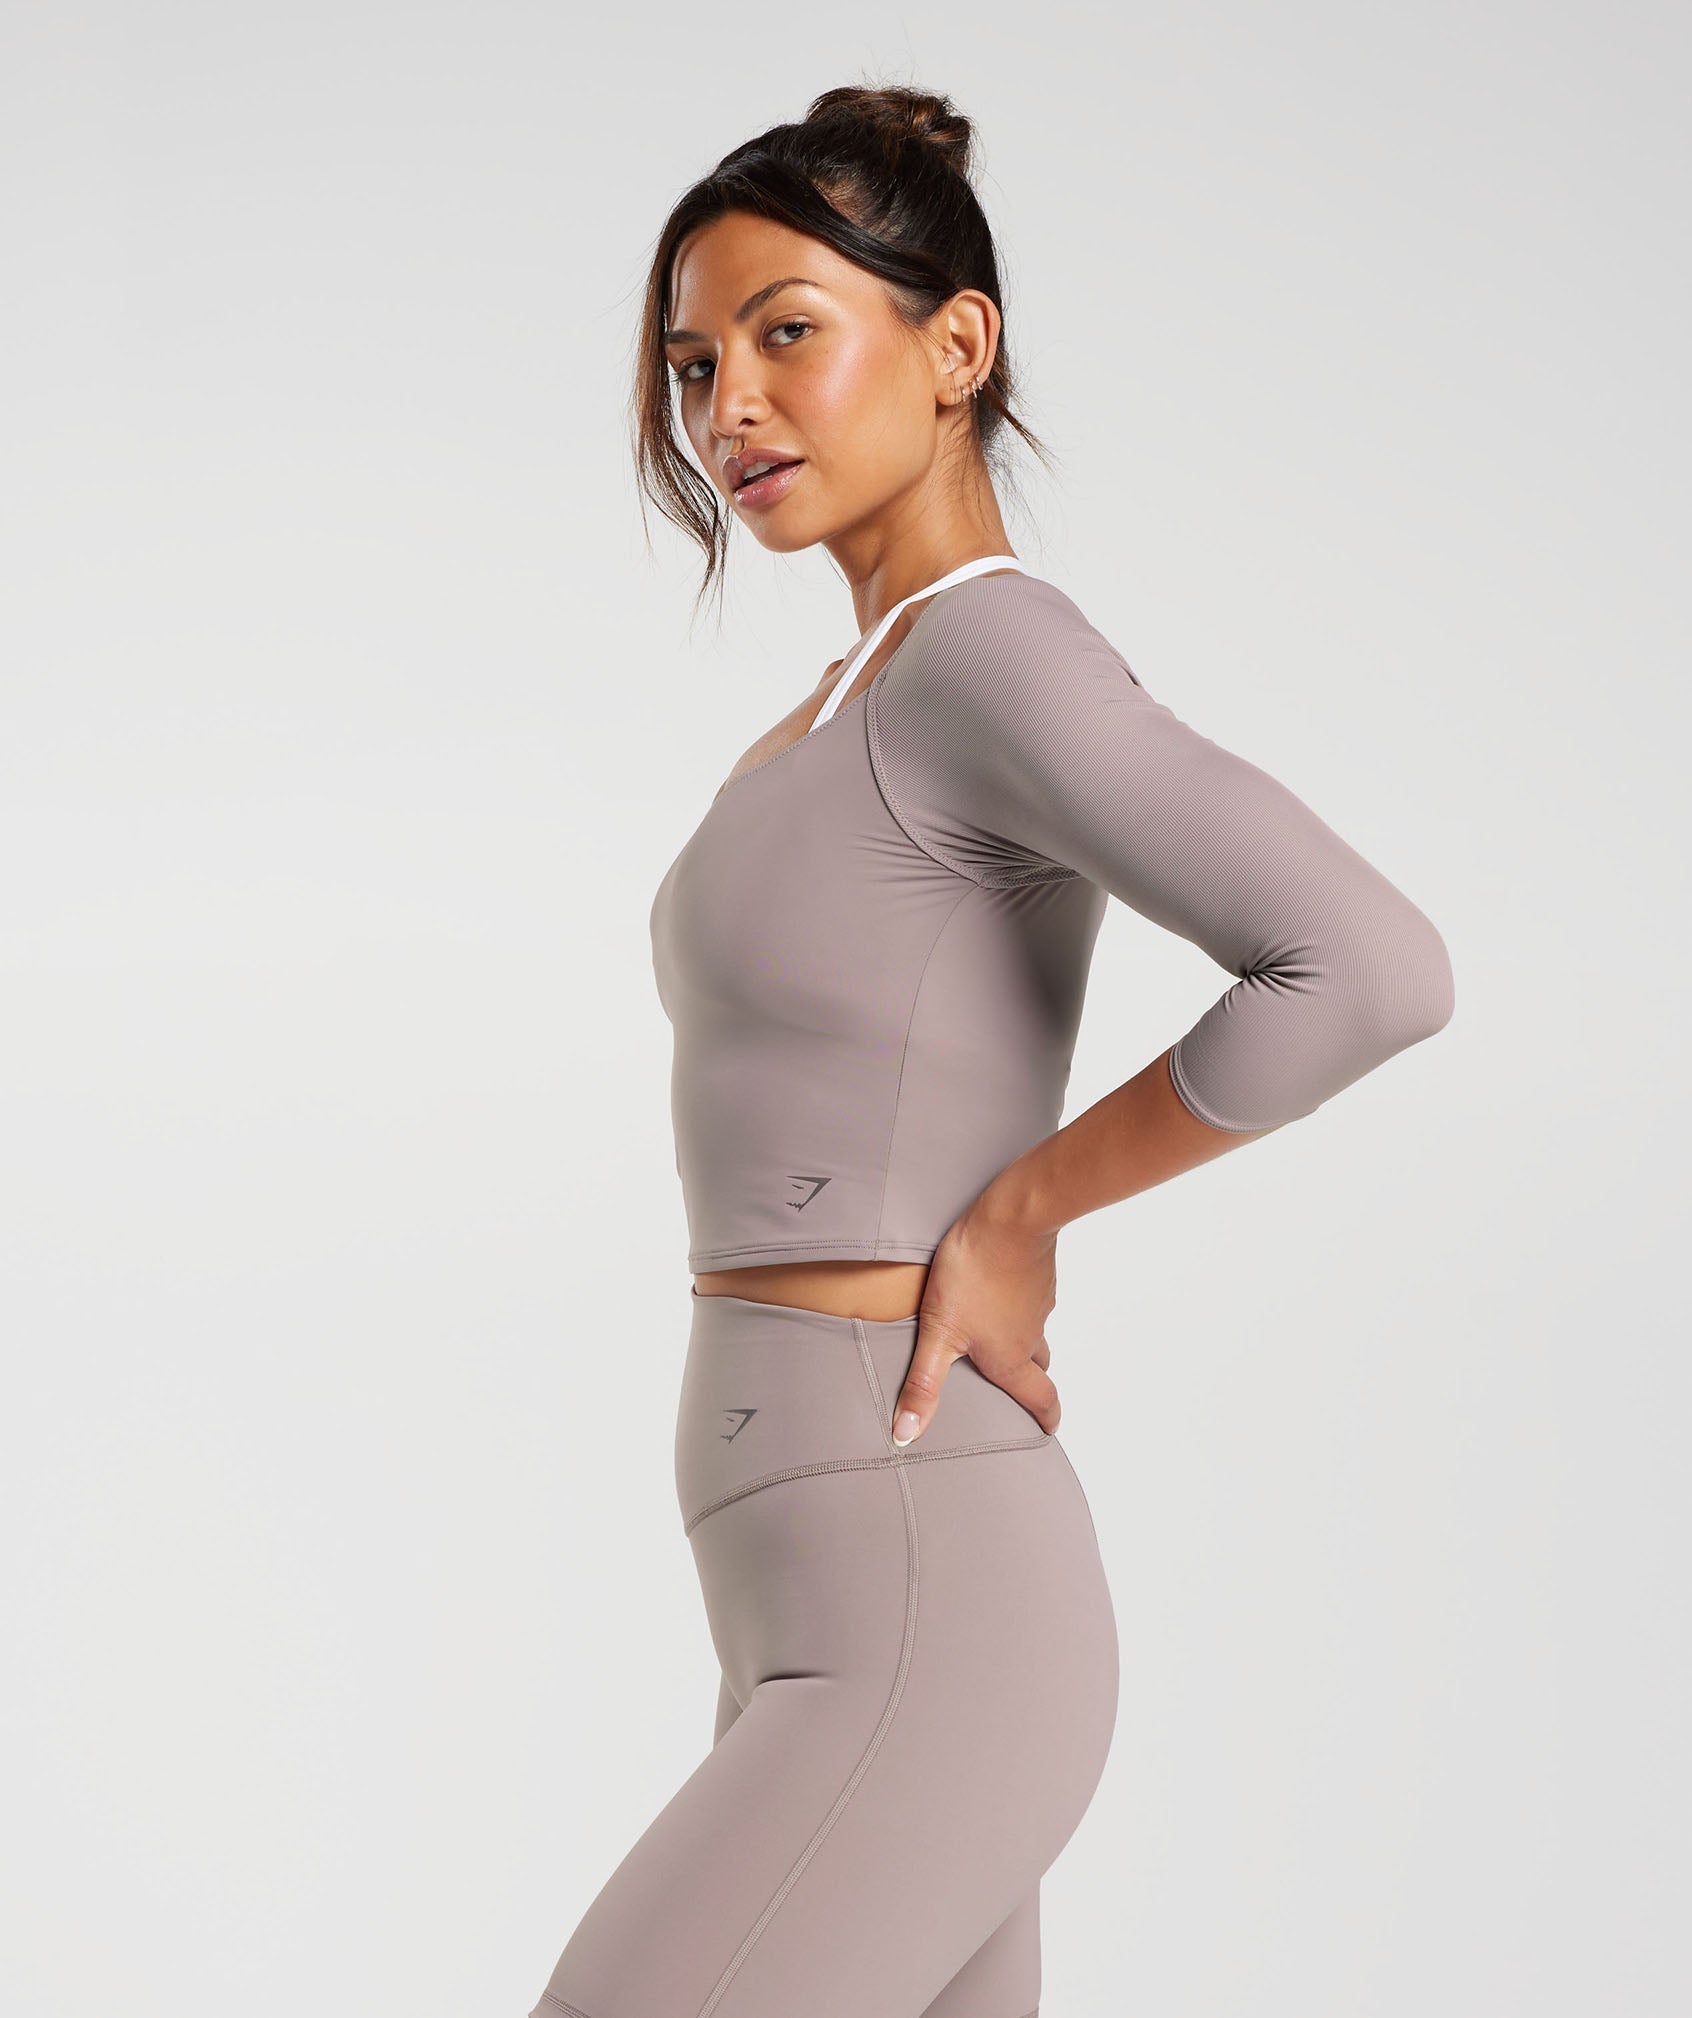 Elevate 3/4 Sleeve Crop Top in Washed Mauve - view 4